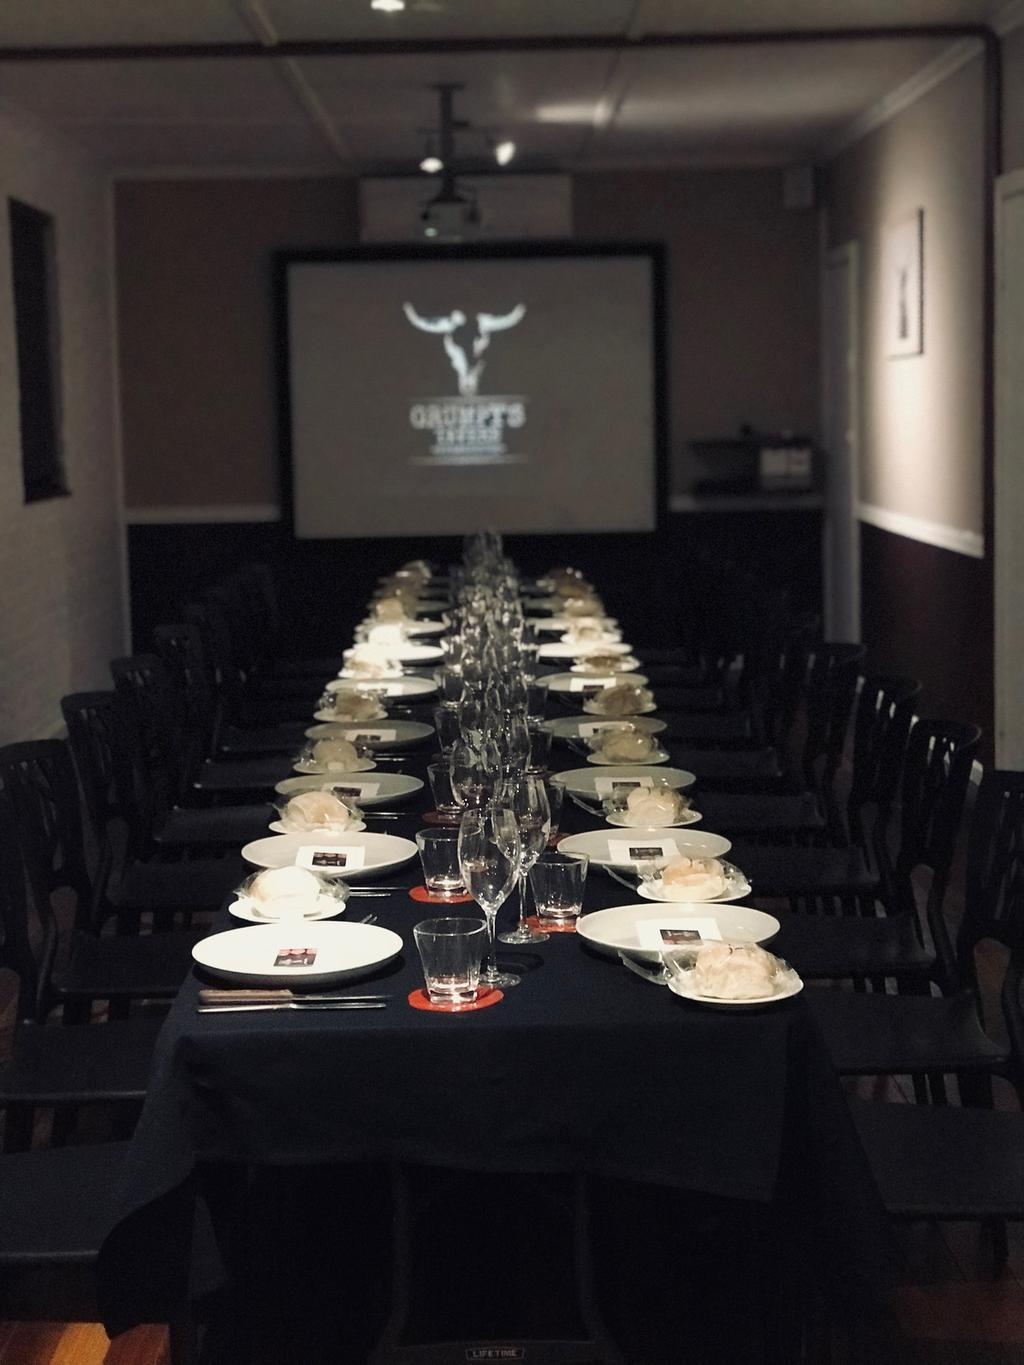 Room & Equipment Hire Sophisticated and intimate, yet spacious and comfortable to make you and your guests feel special. The Cattle Room is the perfect space to impress and reward your dining party.